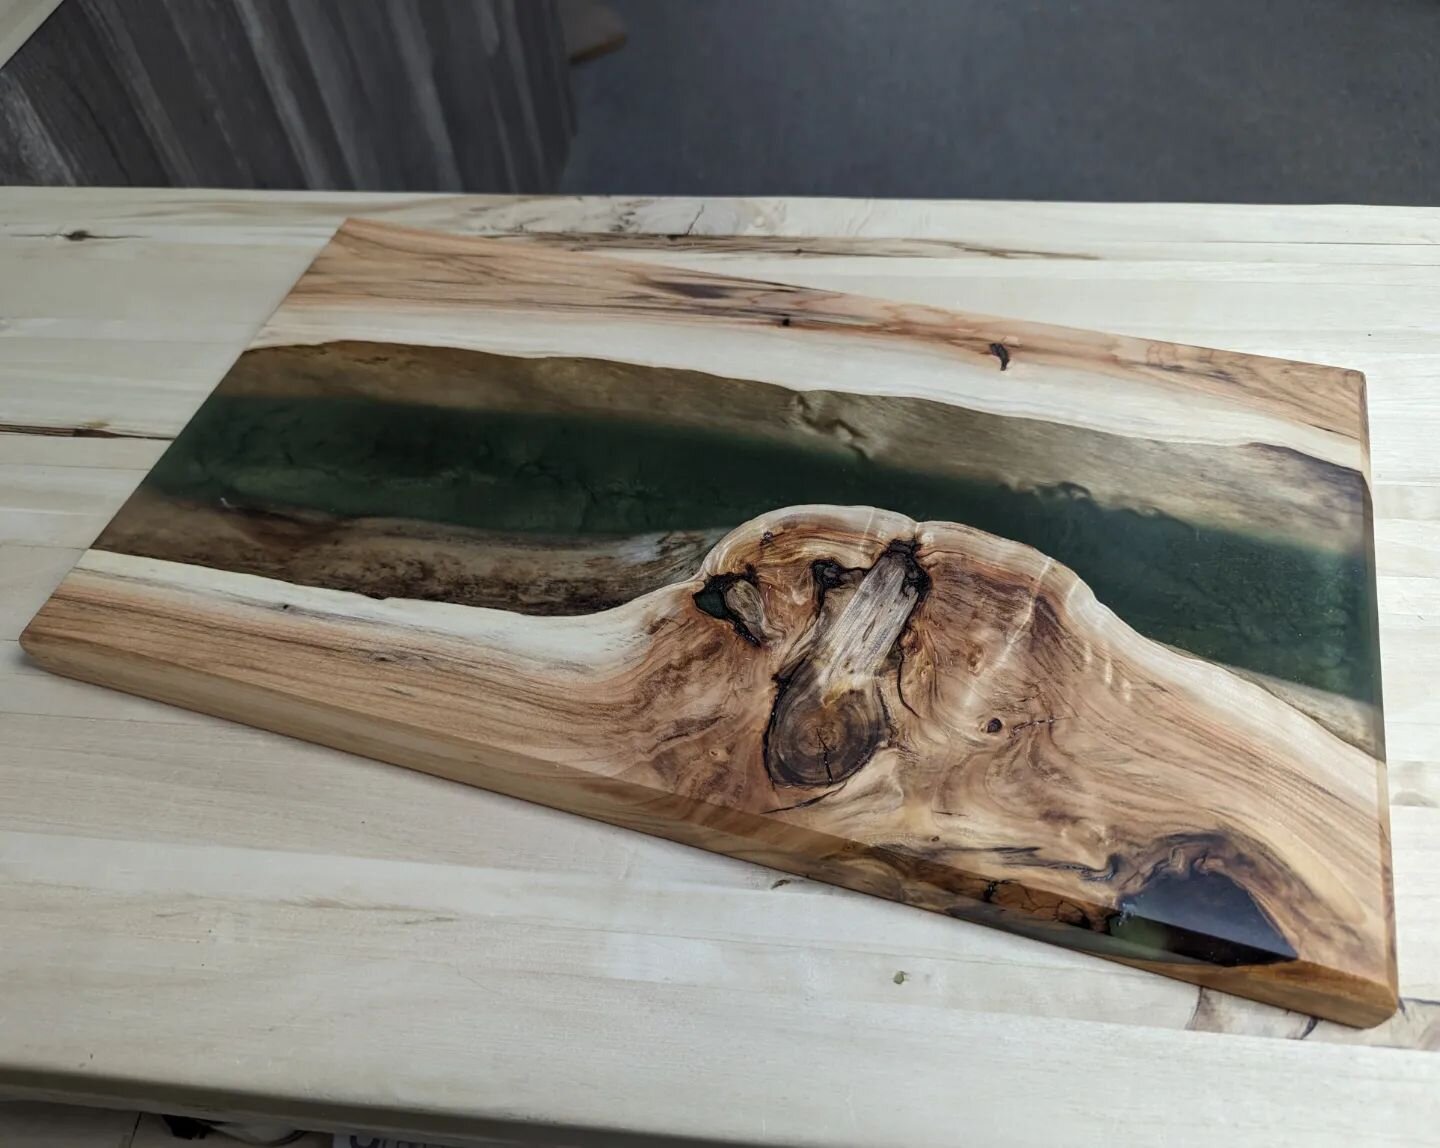 A few amazing cheeseboards from a recent workshop.

Want to make your own? c2woodcraft.com/workshops
.
.
.
#c2woodcraft #woodworking #resin #denver #englewood #localbusiness #custom #creation #woodcraft #maker #diy #workshop #cheeseboard